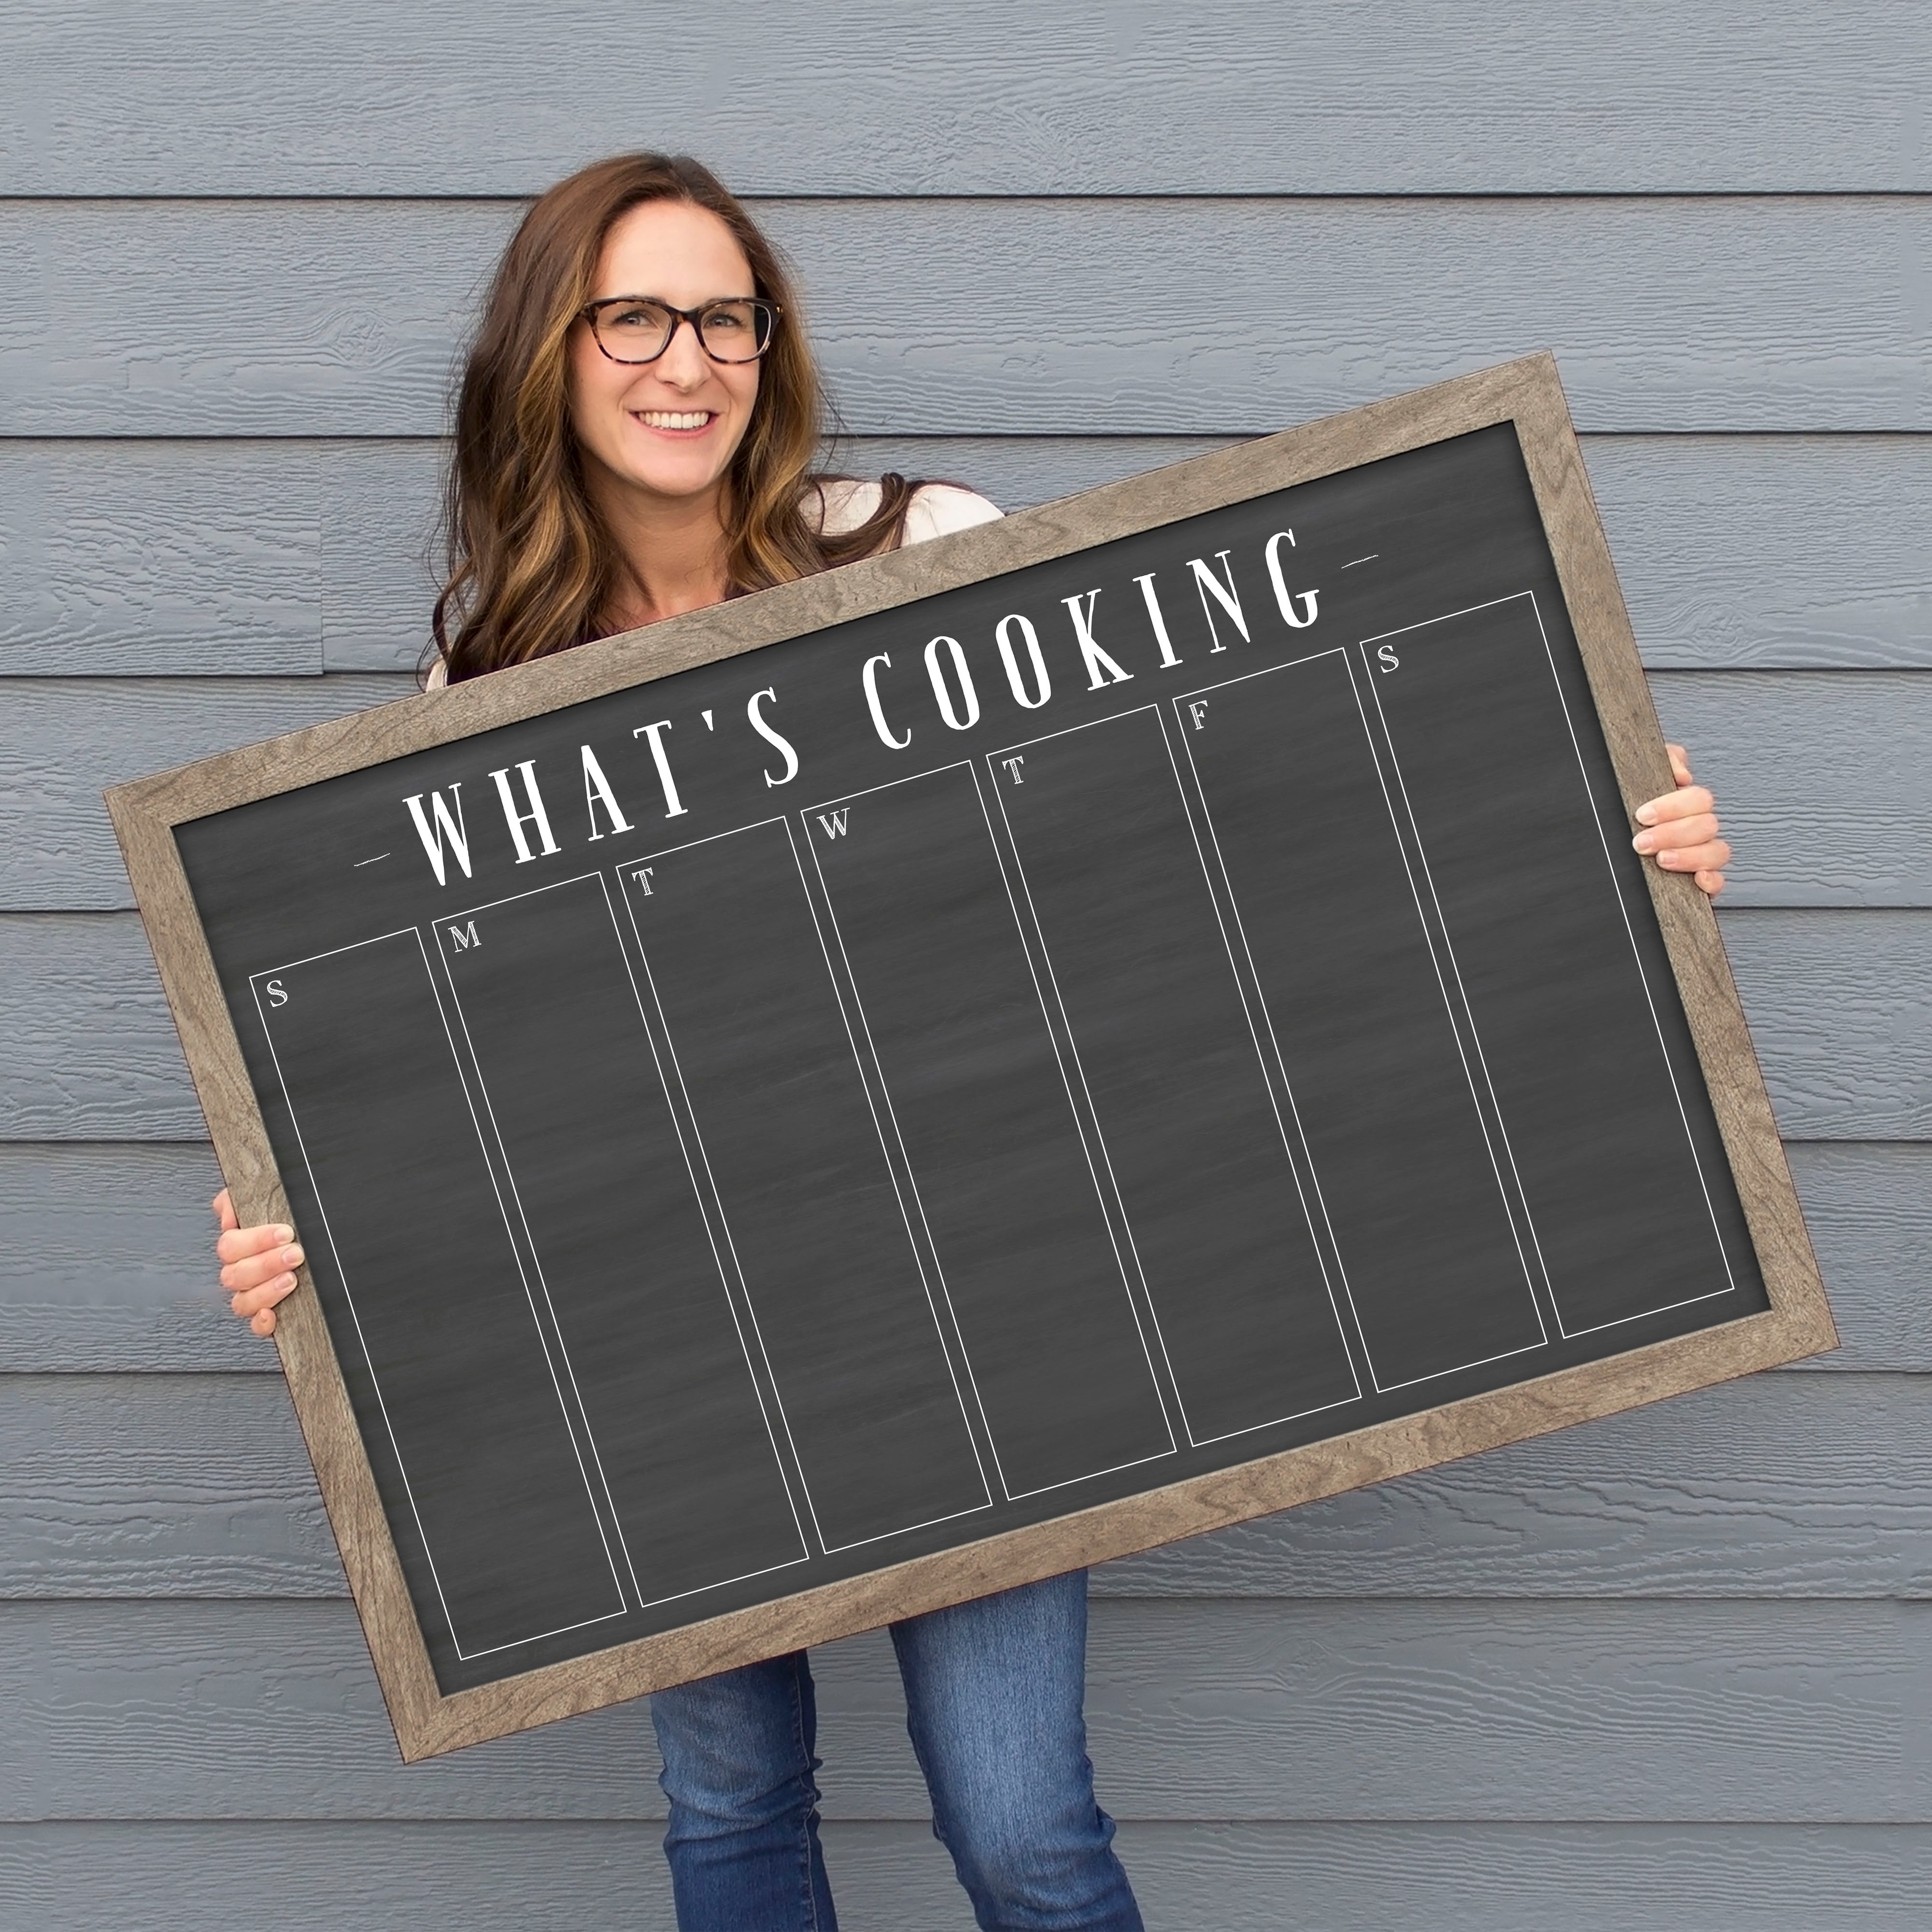 A framed dry-erase weekly calender with a chalkboard look hanging on the wall